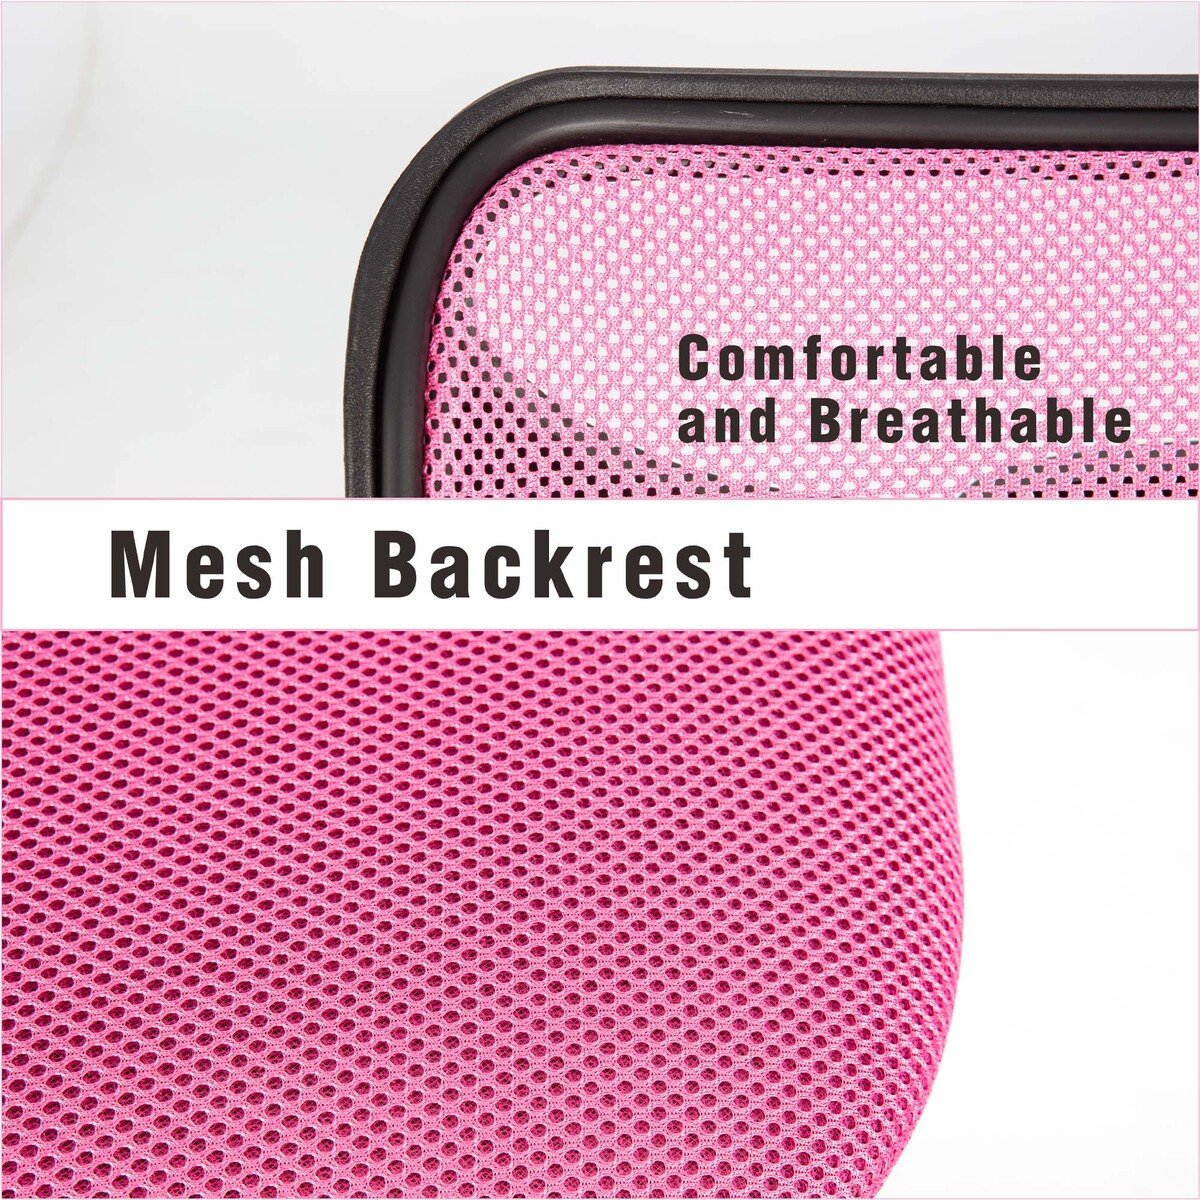 Maple Leaf Mesh Computer/Office Chair QZY-0904D-3 Pink